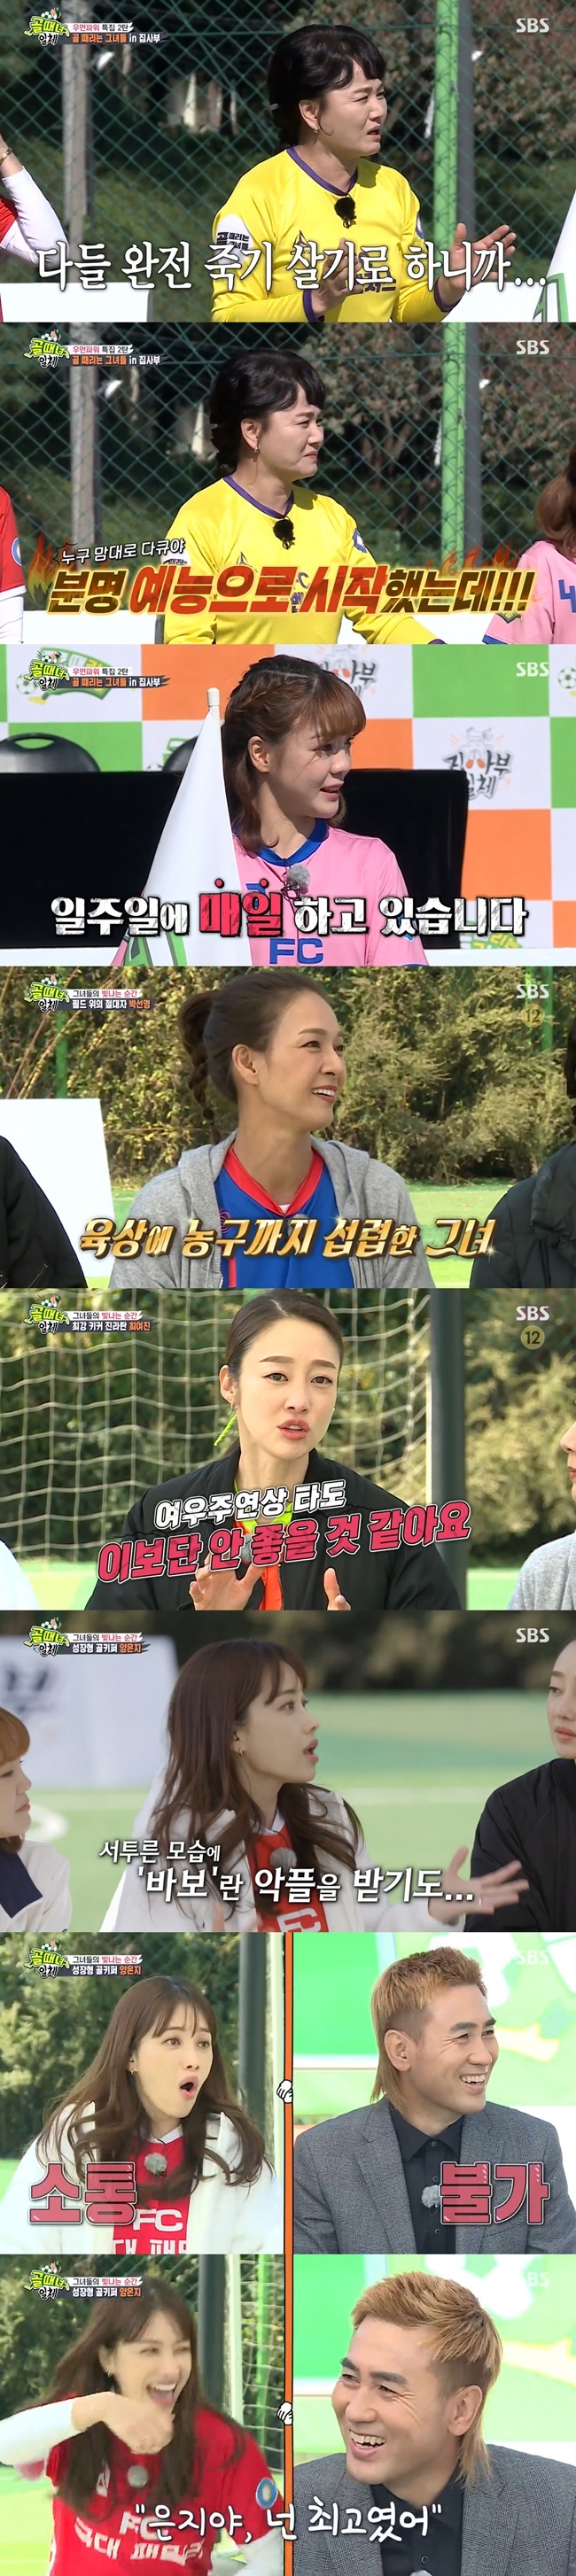 The cast of Golden Girl showed more immersion in soccer than anyone else.On SBSs All The Butlers, which aired on November 21, a special day was unveiled with the nations first womens soccer entertainment program, The Goal-Shitting Girls (hereinafter referred to as Goal-Shoo-Shill Lee, Yang Eun Ji, Park Sun-young, Choi Yeo-jin, Kim Byung-ji, Choi Jin-chul) ...Lee Seung-gi said, The highest audience rating of Gol-Gun-Gyeo has risen to 9.3% and the highest audience rating per minute has risen to 12%.I left football, everyone has a great enthusiasm for football, and I have no enthusiasm for football, said Kyeong-shil Lee, laughing at Confessions.Kyeong-shil Lee said, I think you like to play with your heart, he said. I can not do that.When I was a pilot, I smelled blood on my neck. Someones claws are missing, someones muscle is up.Park Sun-young, who won the season 1 championship FC Bull moth captain and MVP, said, I learn Exercise more easily than others.I was from a gym, but I did not play soccer, I played basketball and basketball. Choi Yeo-jin said, My sister is an absoluteEveryone is wary and scared, he explained.Park Sun-young, along with Choi Yeo-jin, said, I was very tired in season 1, but everyone seems to be developing.Choi Yeo-jin said, I thought that the joy of soccer would be better than anything else, but it would be worse than winning the best actress.Kim Byung-ji was embarrassed by Choi Yeo-jins sudden tears, saying it was not a World Cup.Goalkeeper Yang Eun Jis inner heart also revealed: Football, futsal started without knowing anything.I did not know more, so I was so frustrated with the bad news, said Byeongji. I should understand it when I said, Eunji! Yang Eun Ji said, I wanted to be recognized, but I have never heard of praise. I saw the coach every time I caught the ball, but he did not look at me.